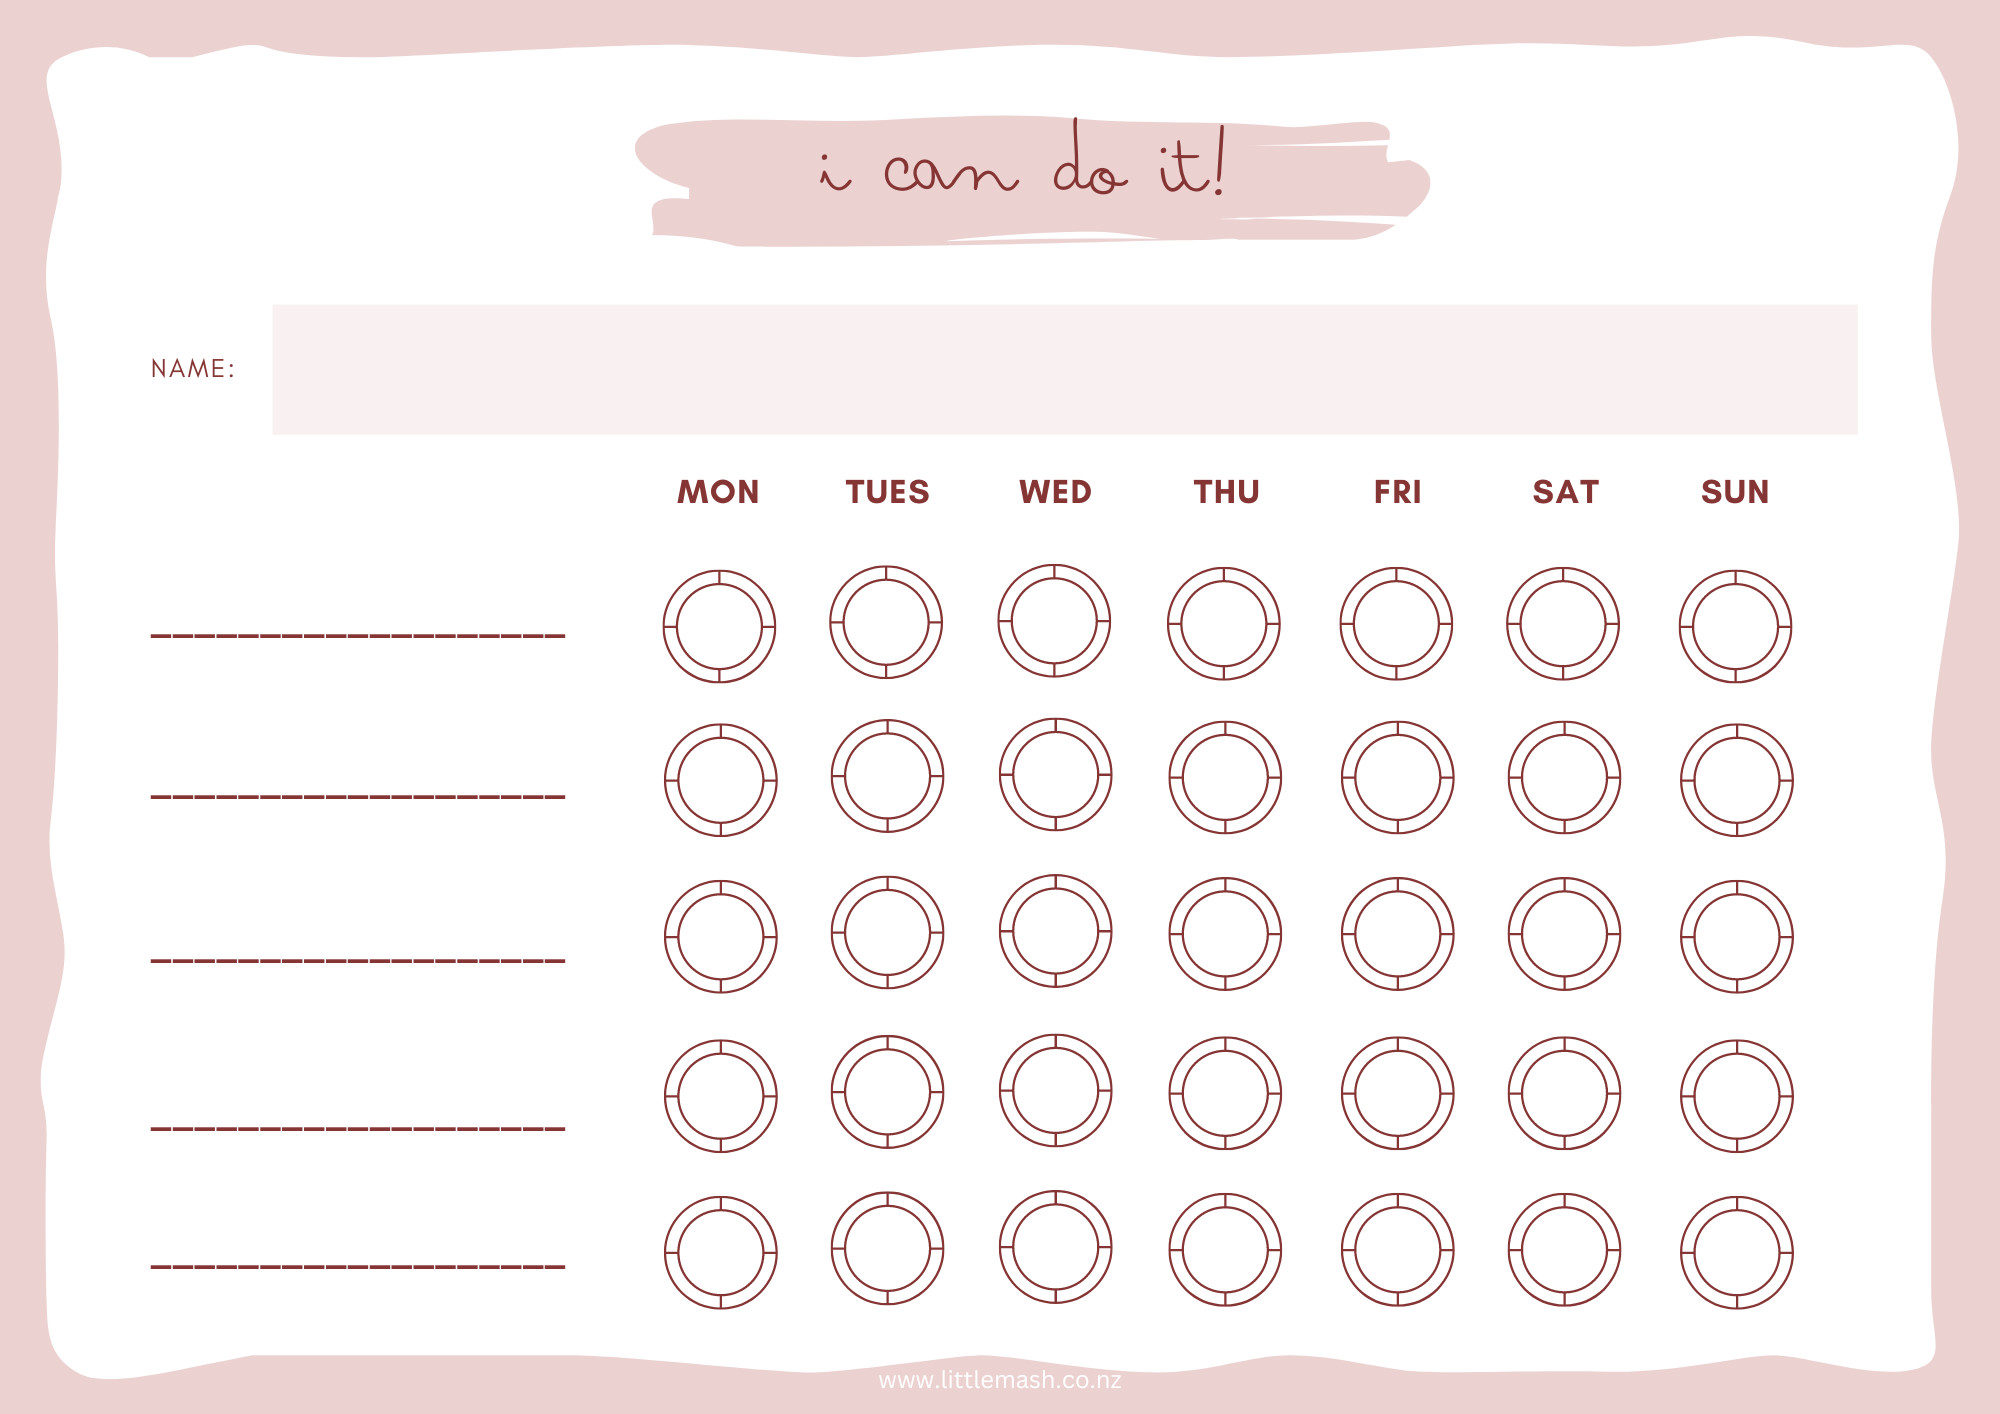 Free download printable chore chart in pink, green and brown